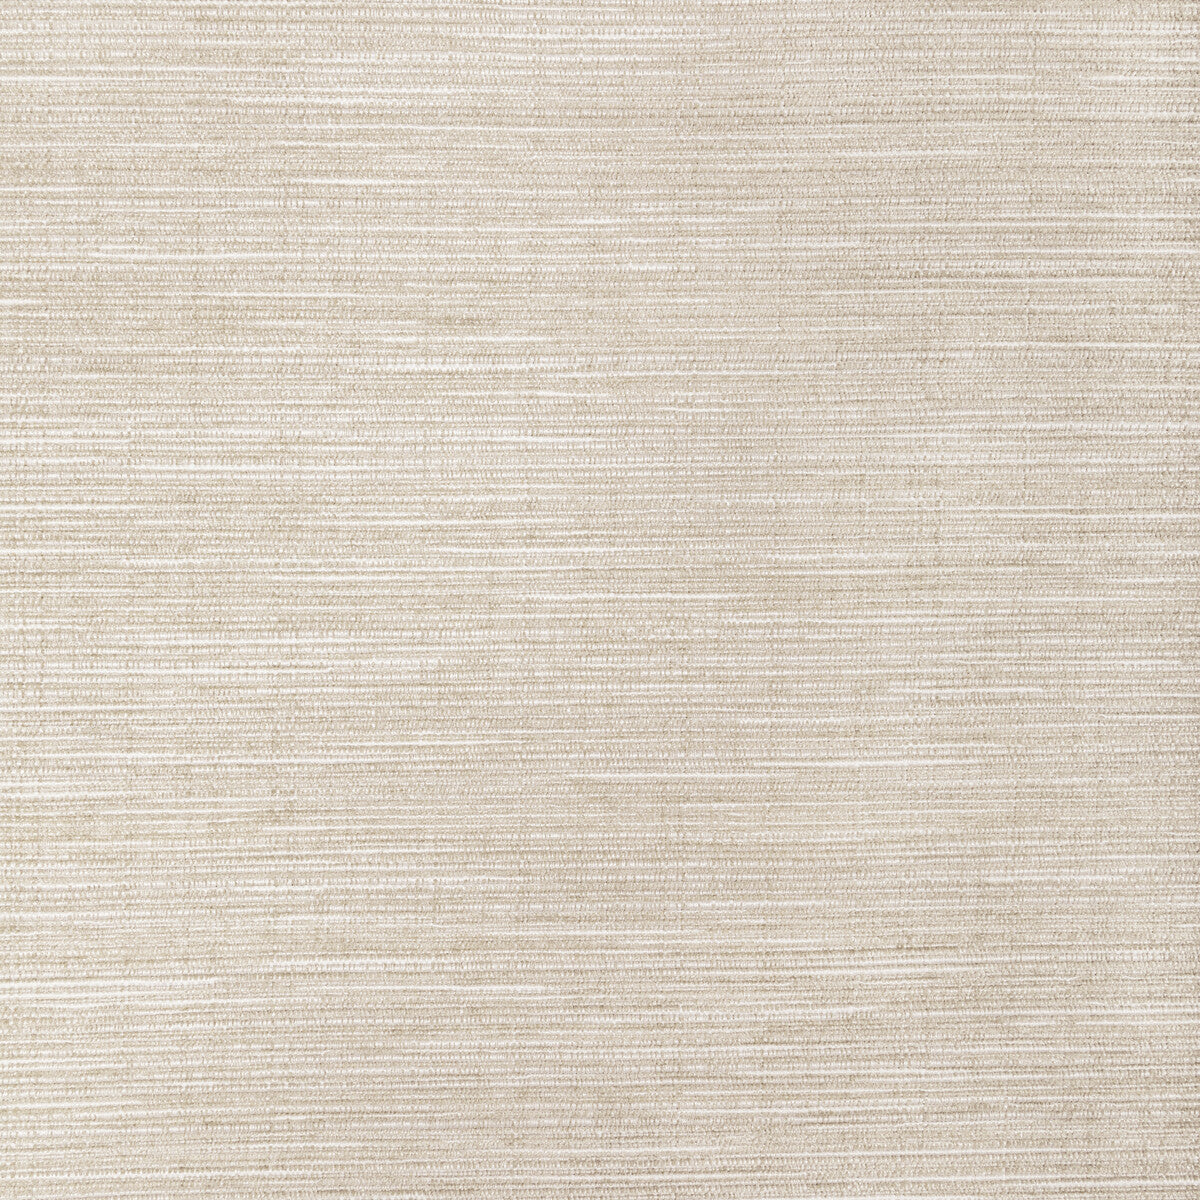 Patrasso fabric in putty color - pattern 36374.116.0 - by Kravet Basics